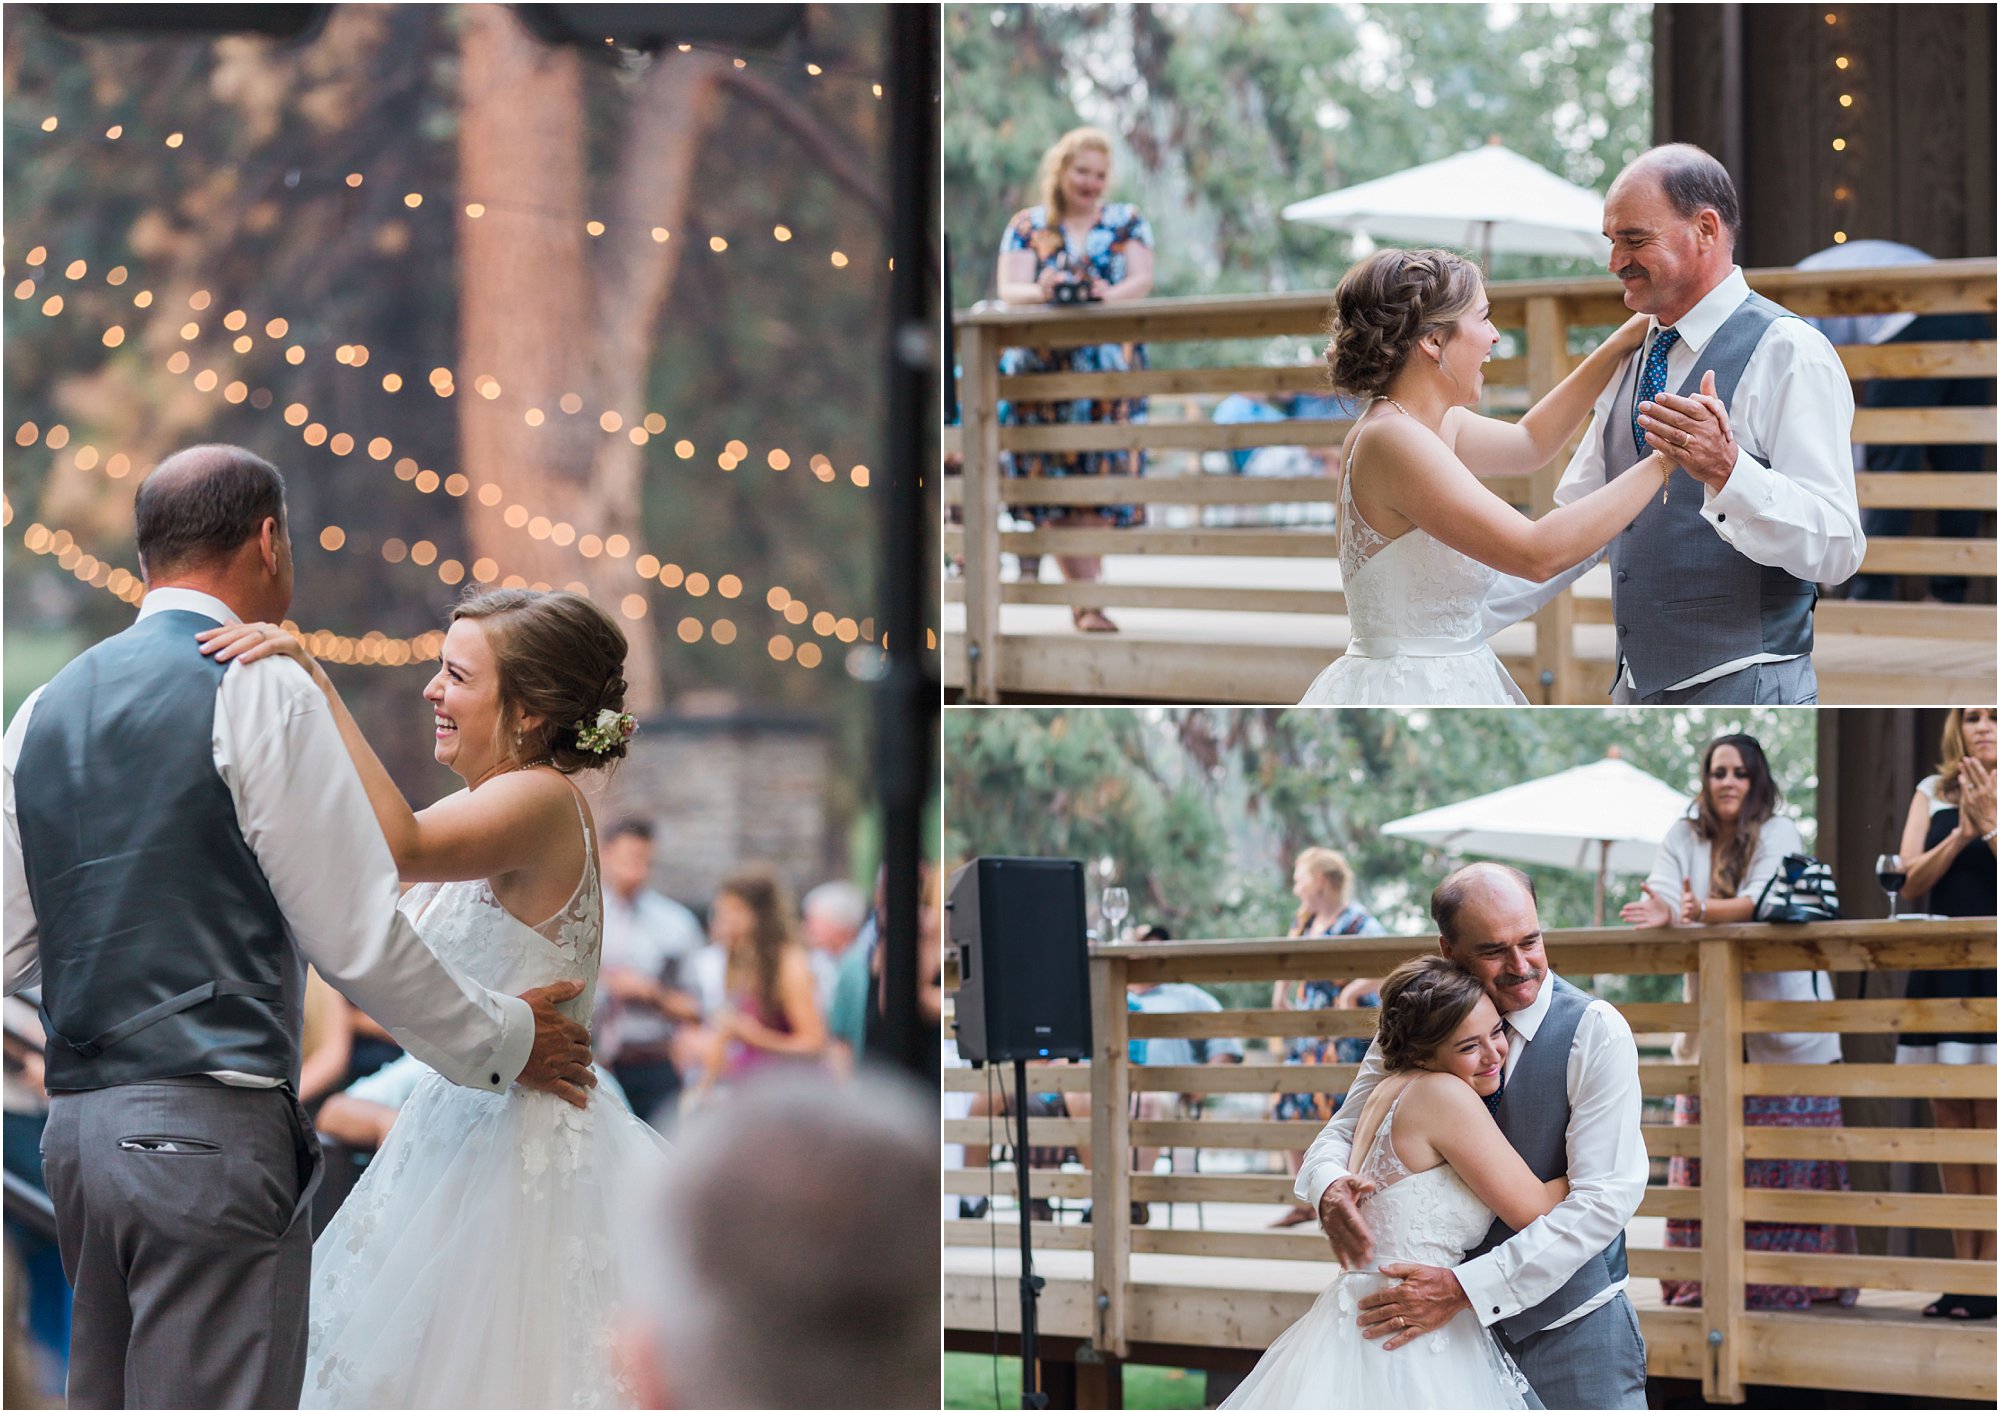 This father and daughter enjoy their dance outside under the twinkle lights at the Rock Springs Ranch wedding venue in Bend, OR. | Erica Swantek Photography